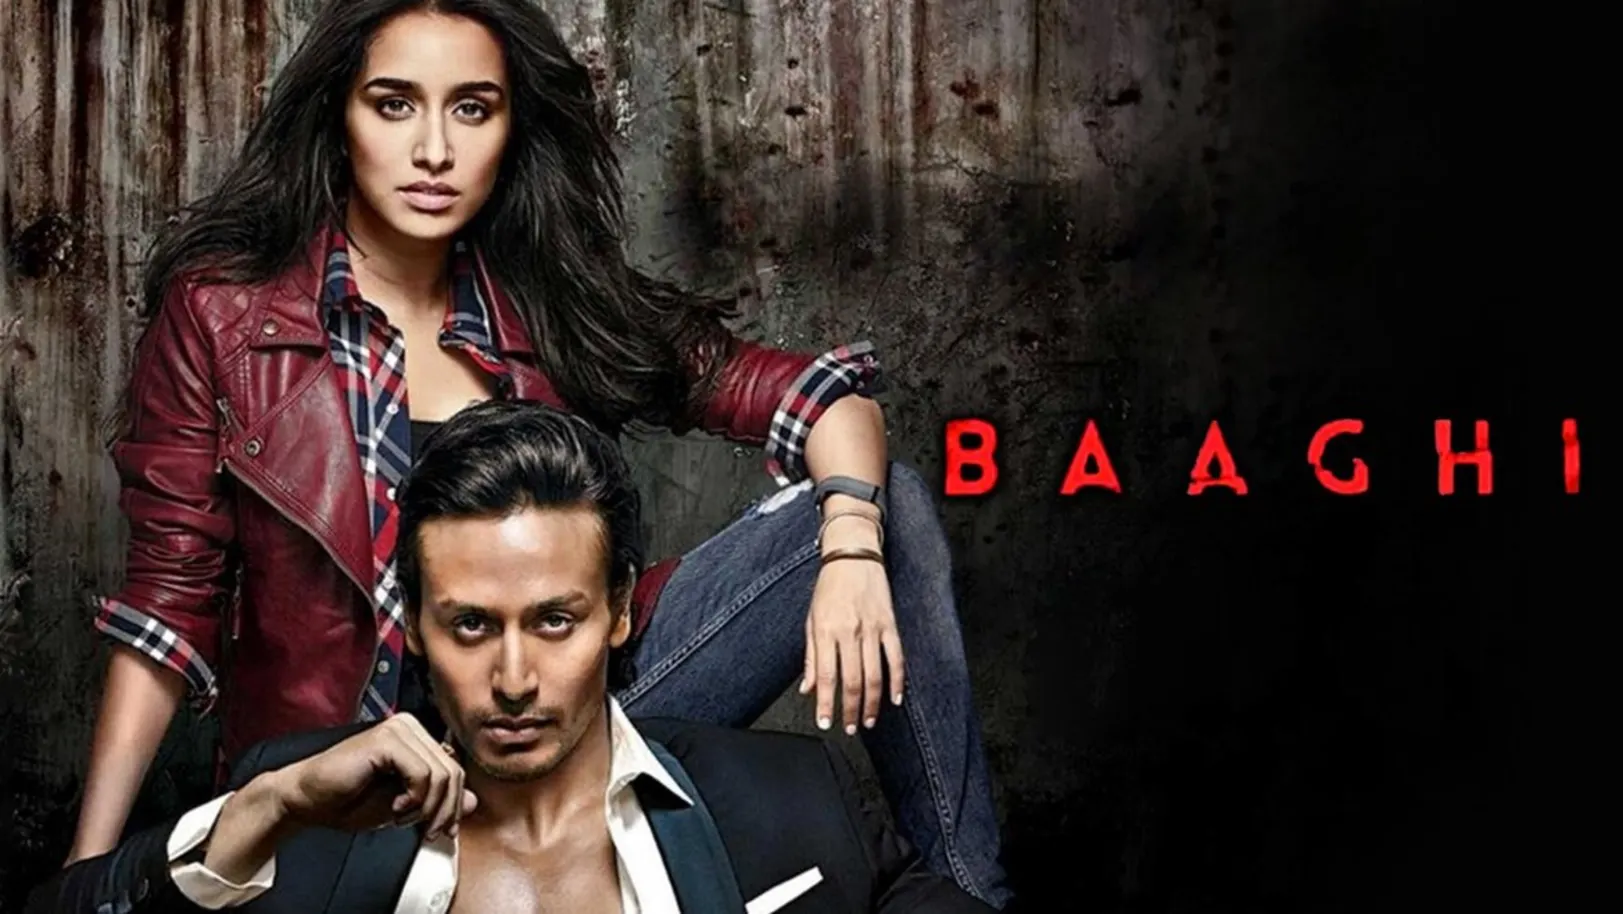 Baaghi Streaming Now On &Pictures